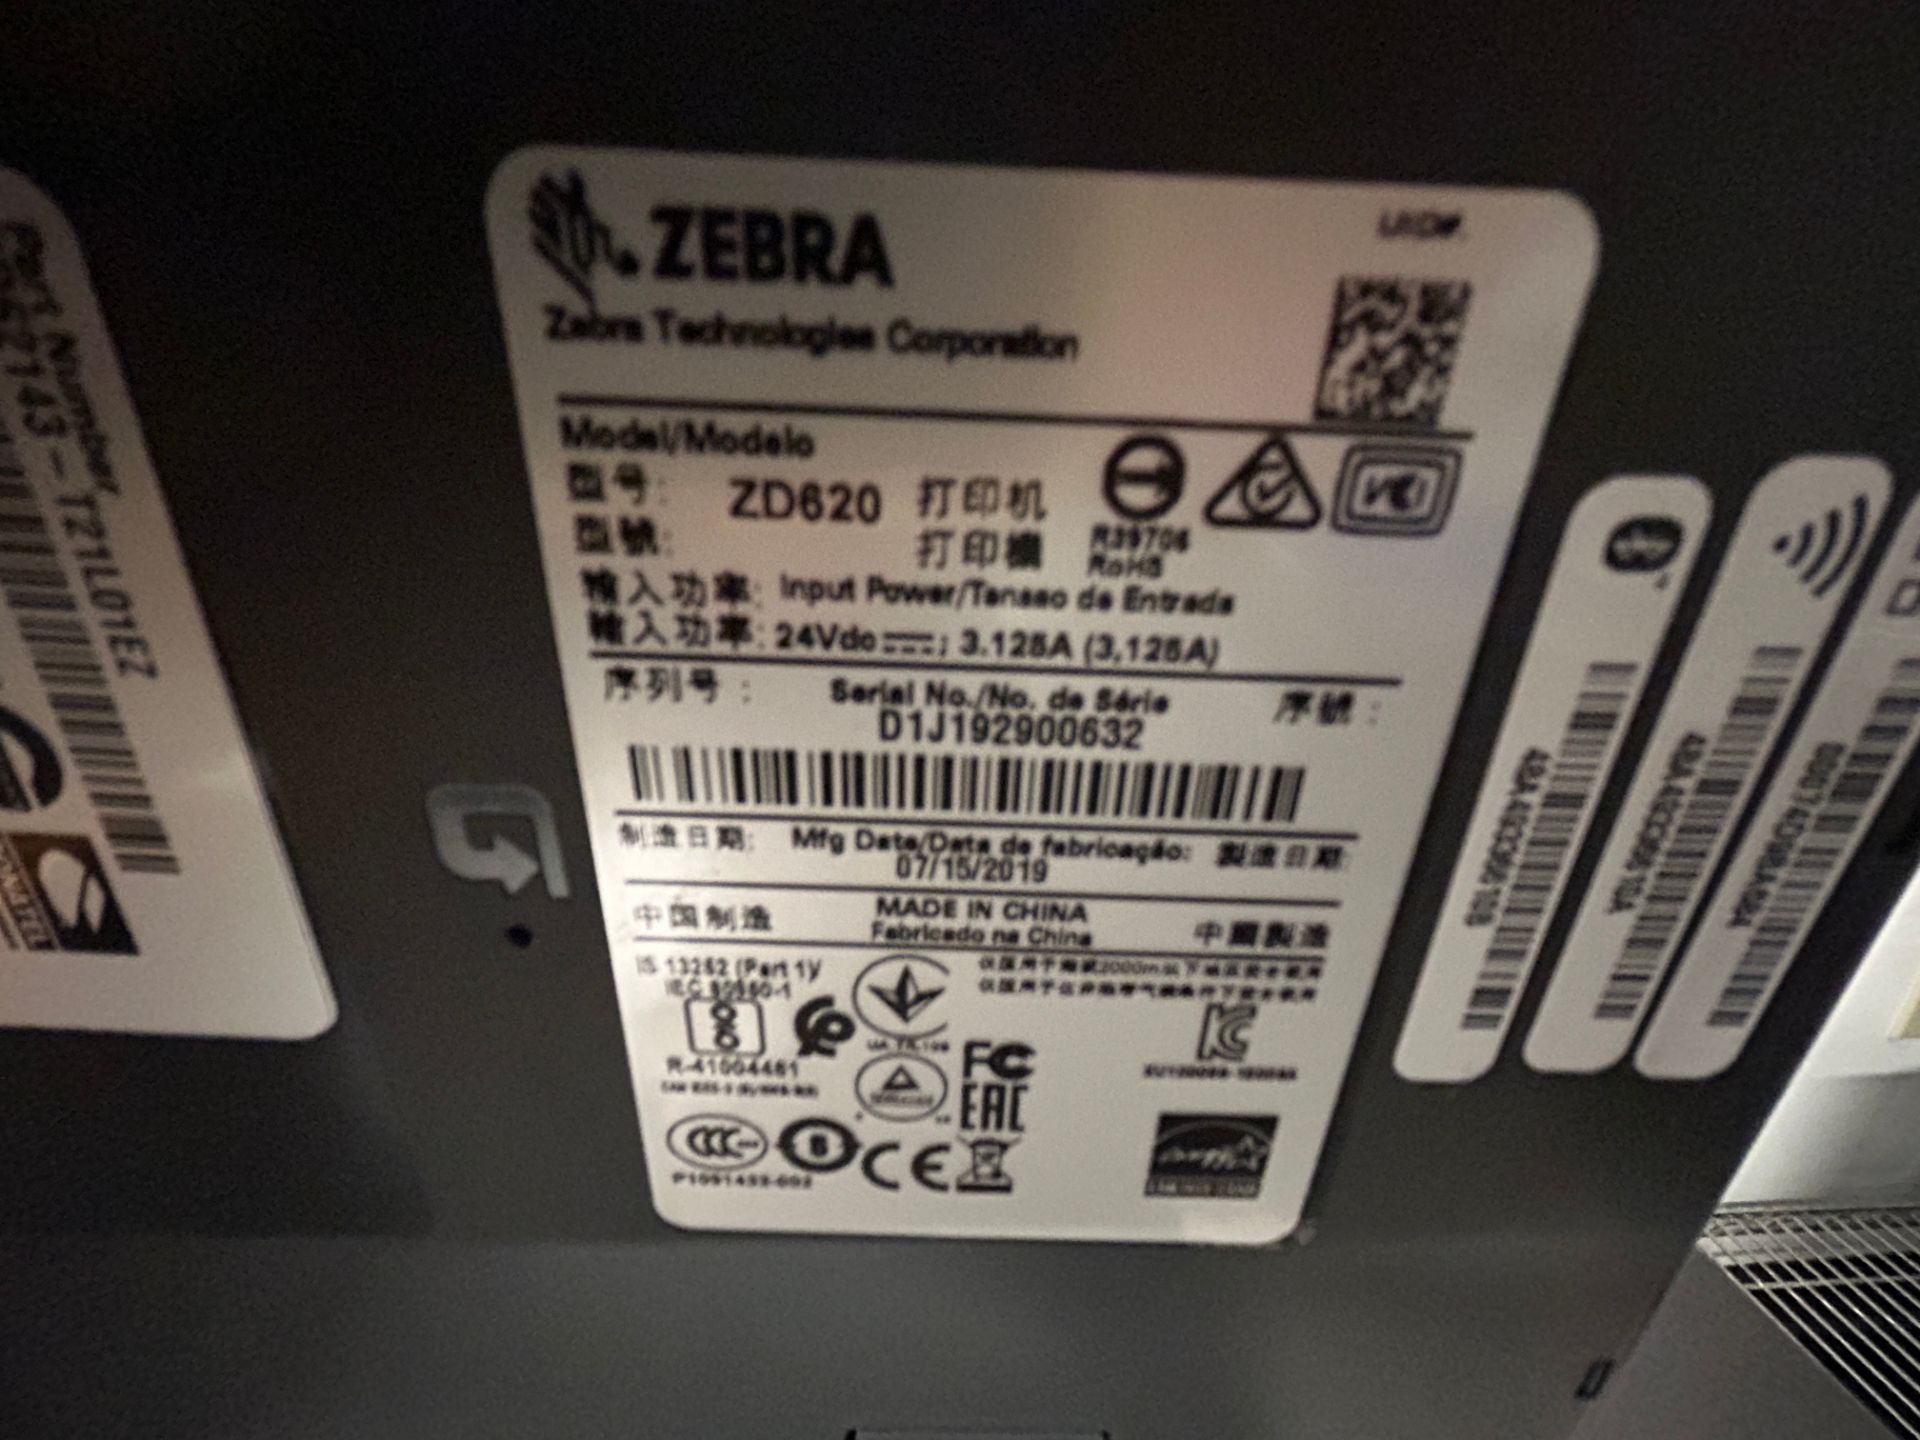 ZEBRA Mdl ZD620, Direct Thermal Label Printer, USB + Ethernet , Networkable, LCD Screen, 203 x 203 - Image 3 of 4